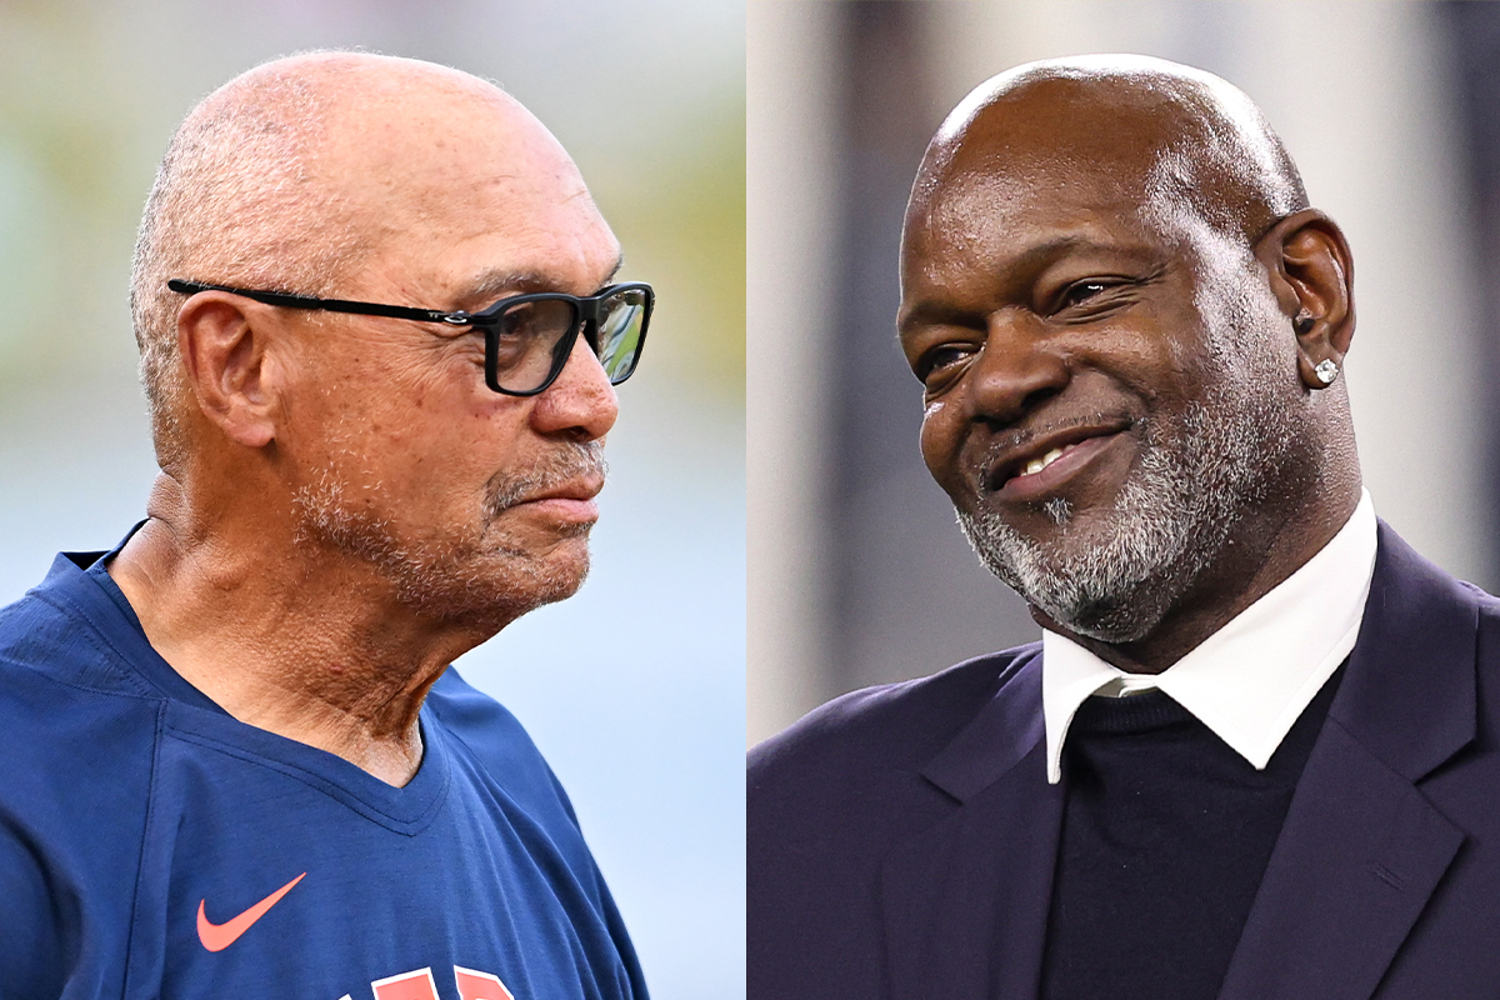 Reggie Jackson and Emmitt Smith’s race talk refuses to let America forget its past